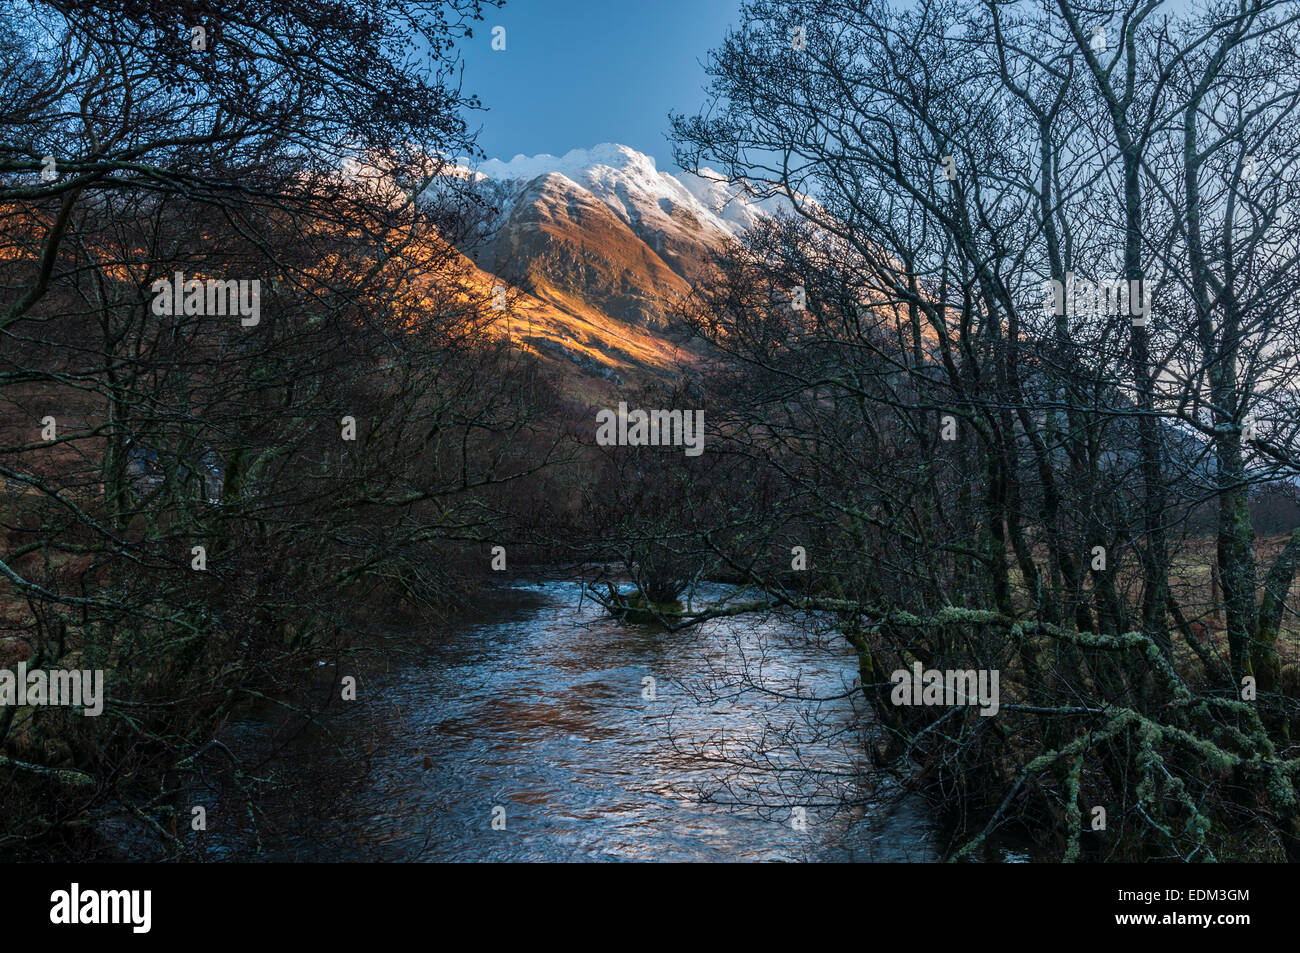 Looking up the River Croe towards Beinn Fhada or Ben Attow with Meall an Fhuarain Mhoir in the middle top of the picture. Stock Photo